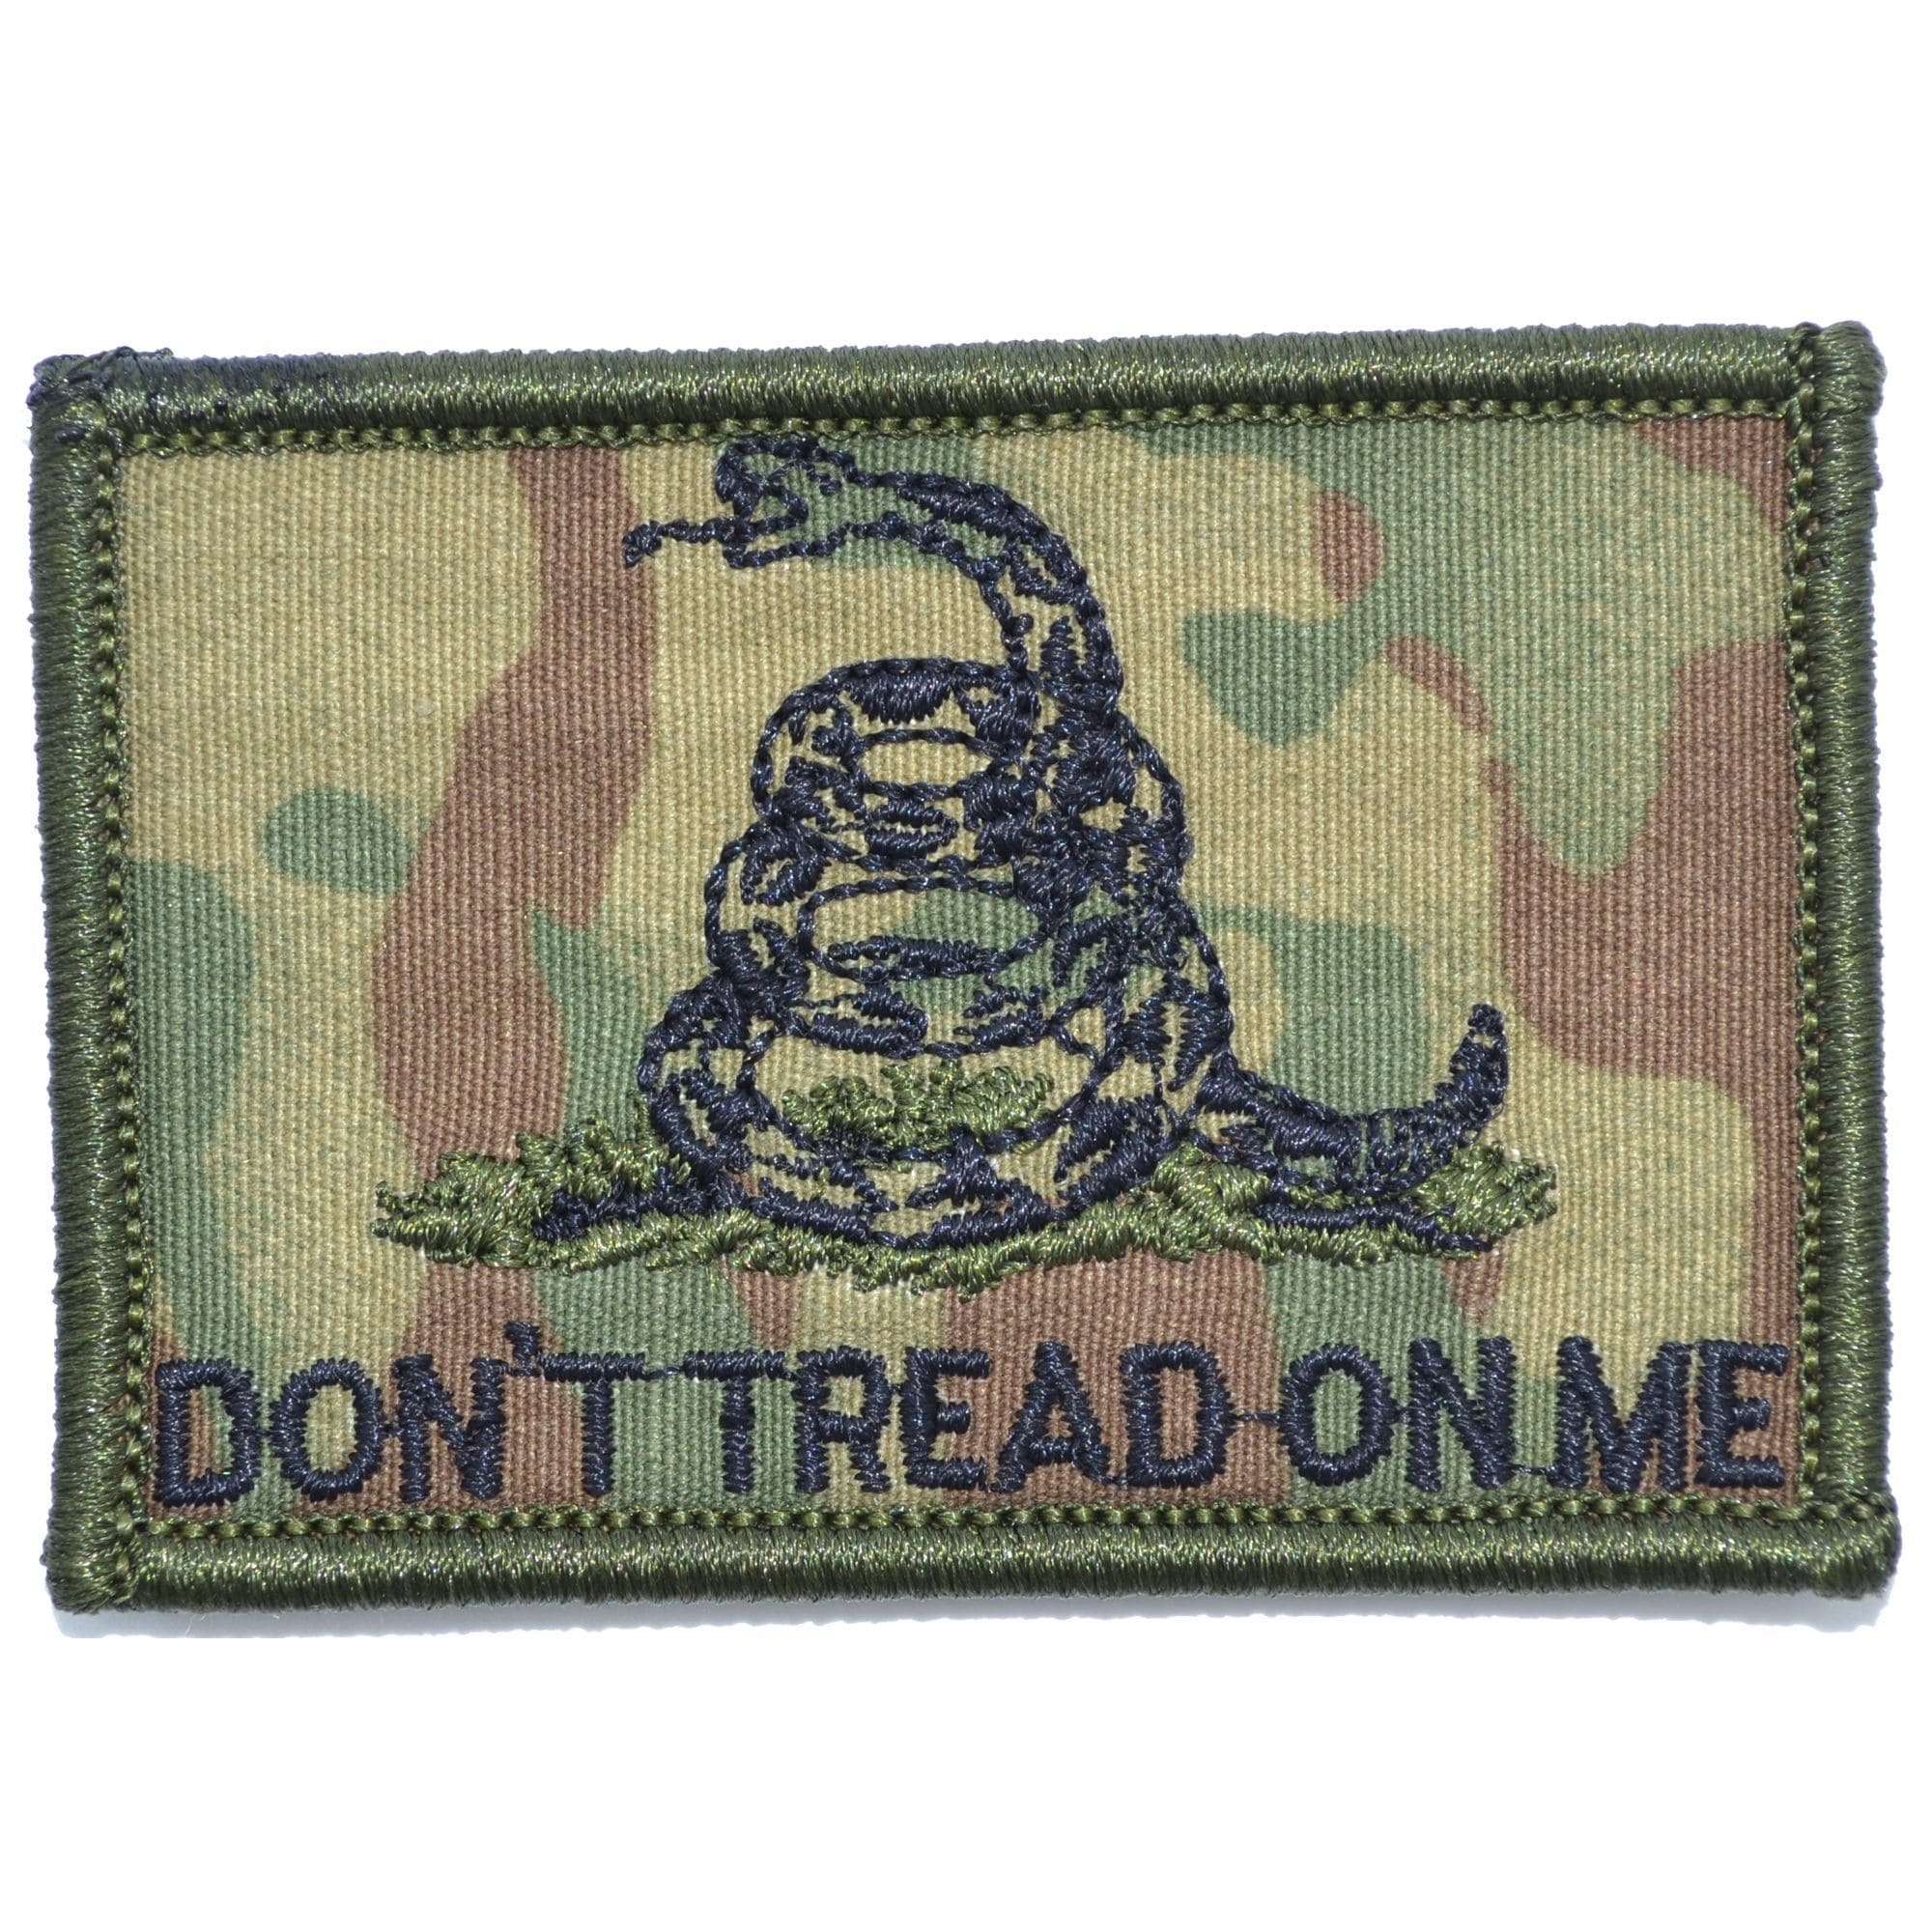 Tactical Gear Junkie Patches MultiCam Don't Tread on Me Gadsden Snake - 2x3 Patch